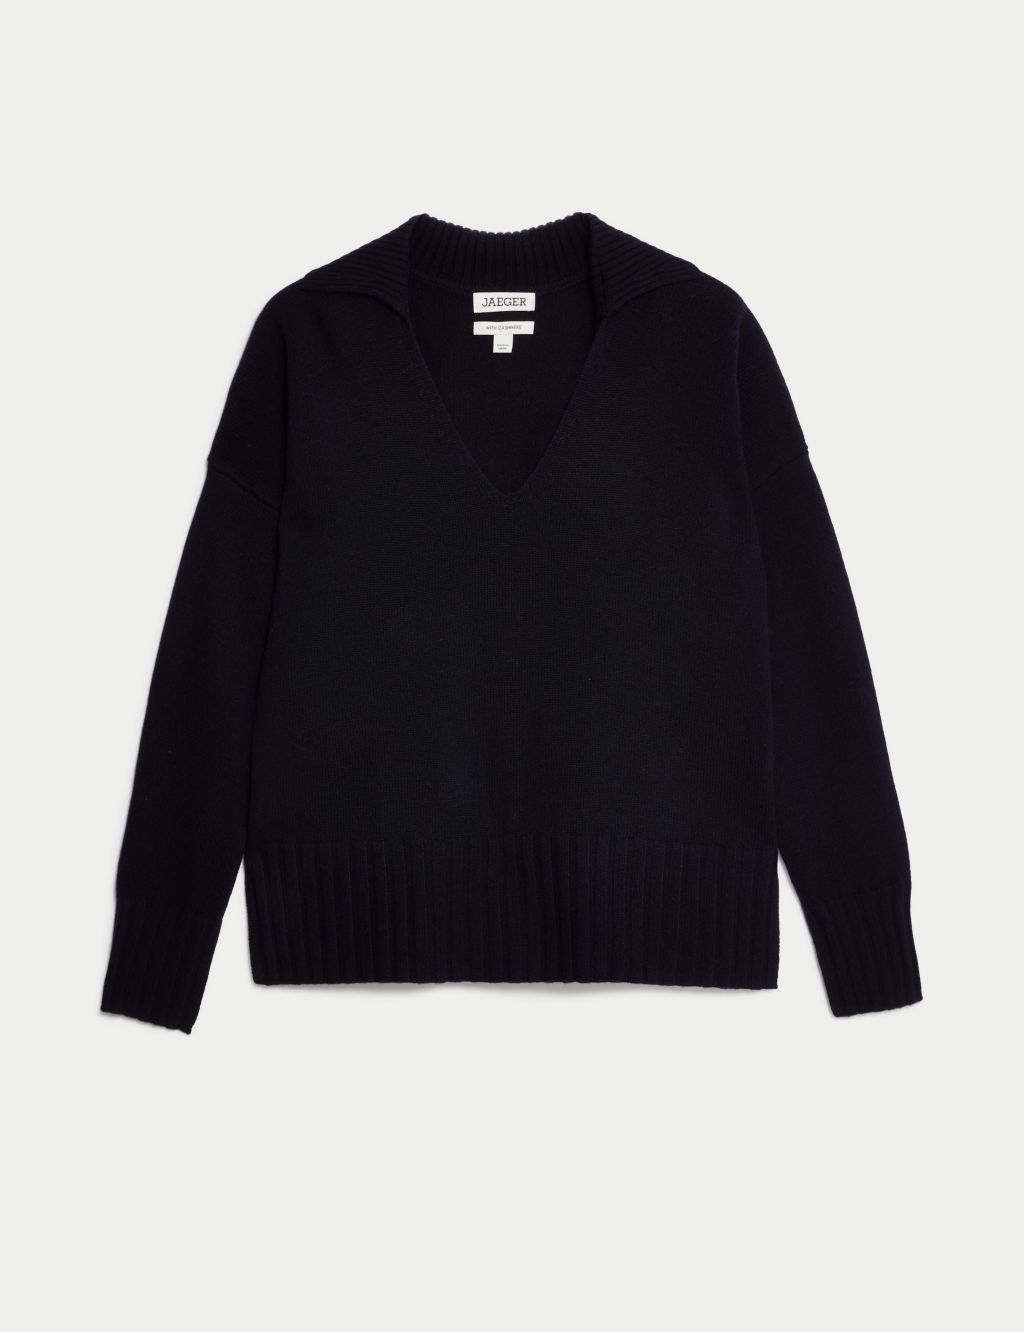 Wool Rich V-Neck Jumper with Cashmere image 2